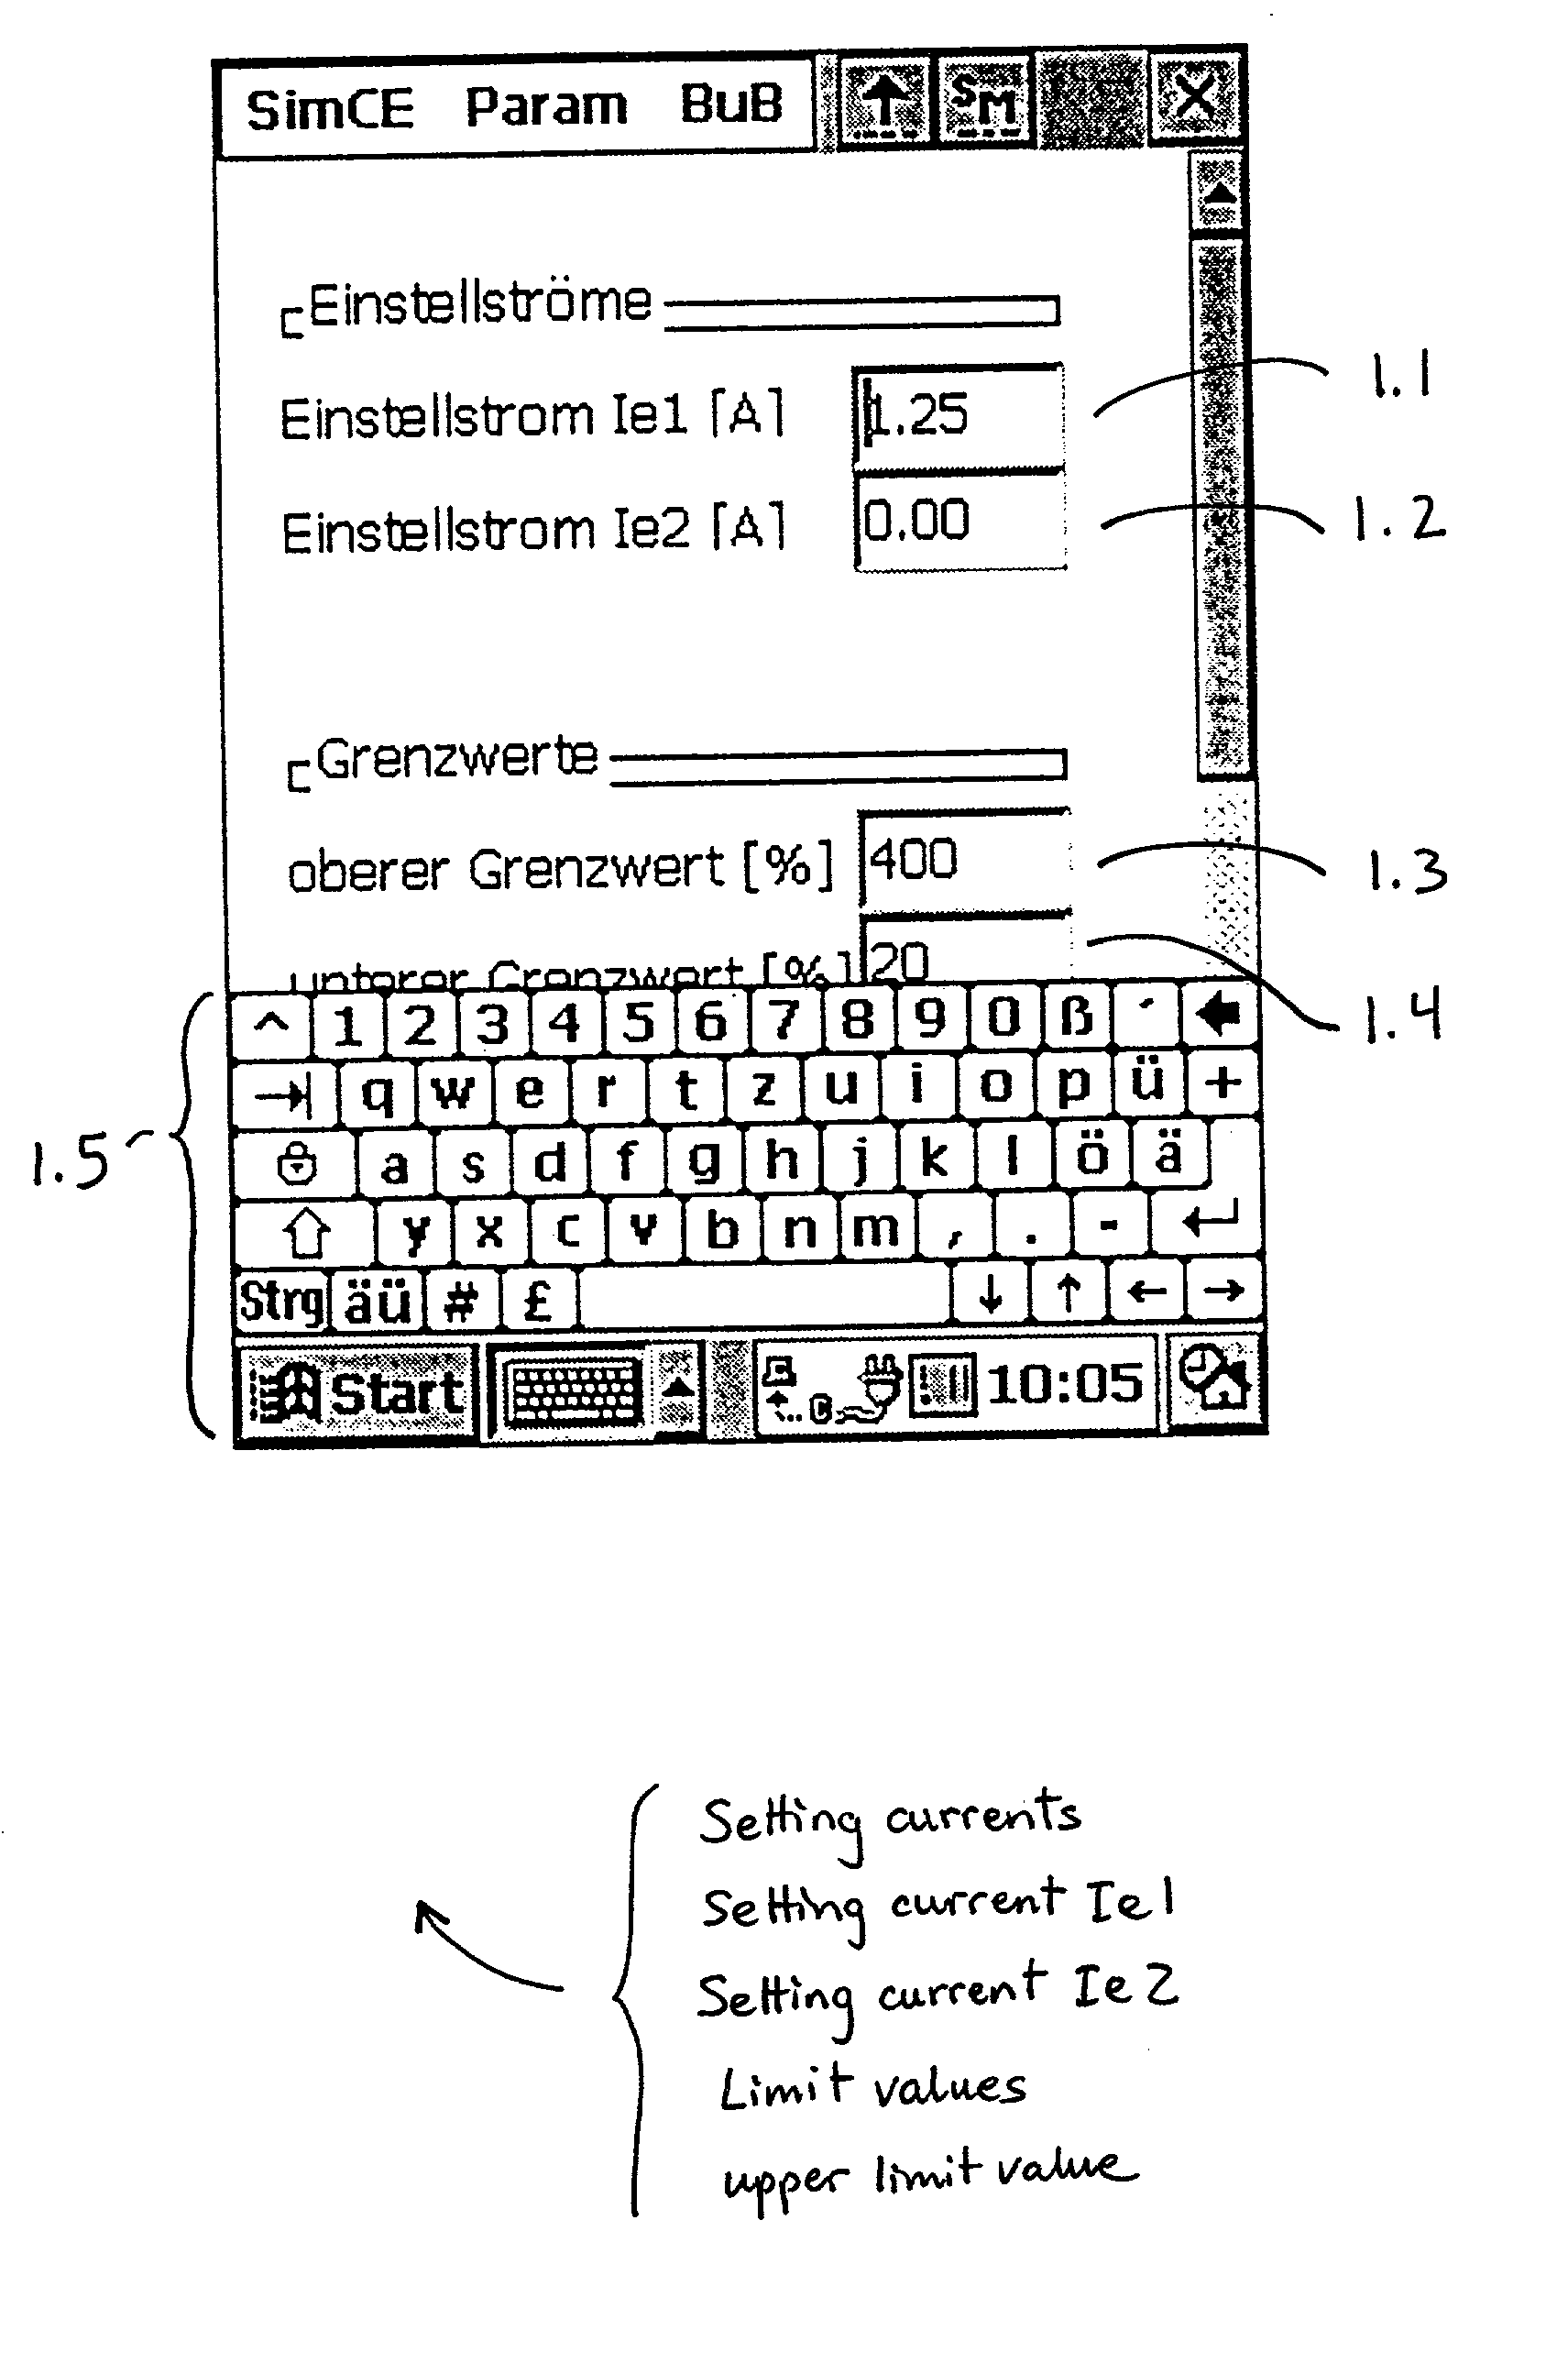 Interactive input with limit-value monitoring and on-line help for a palmtop device